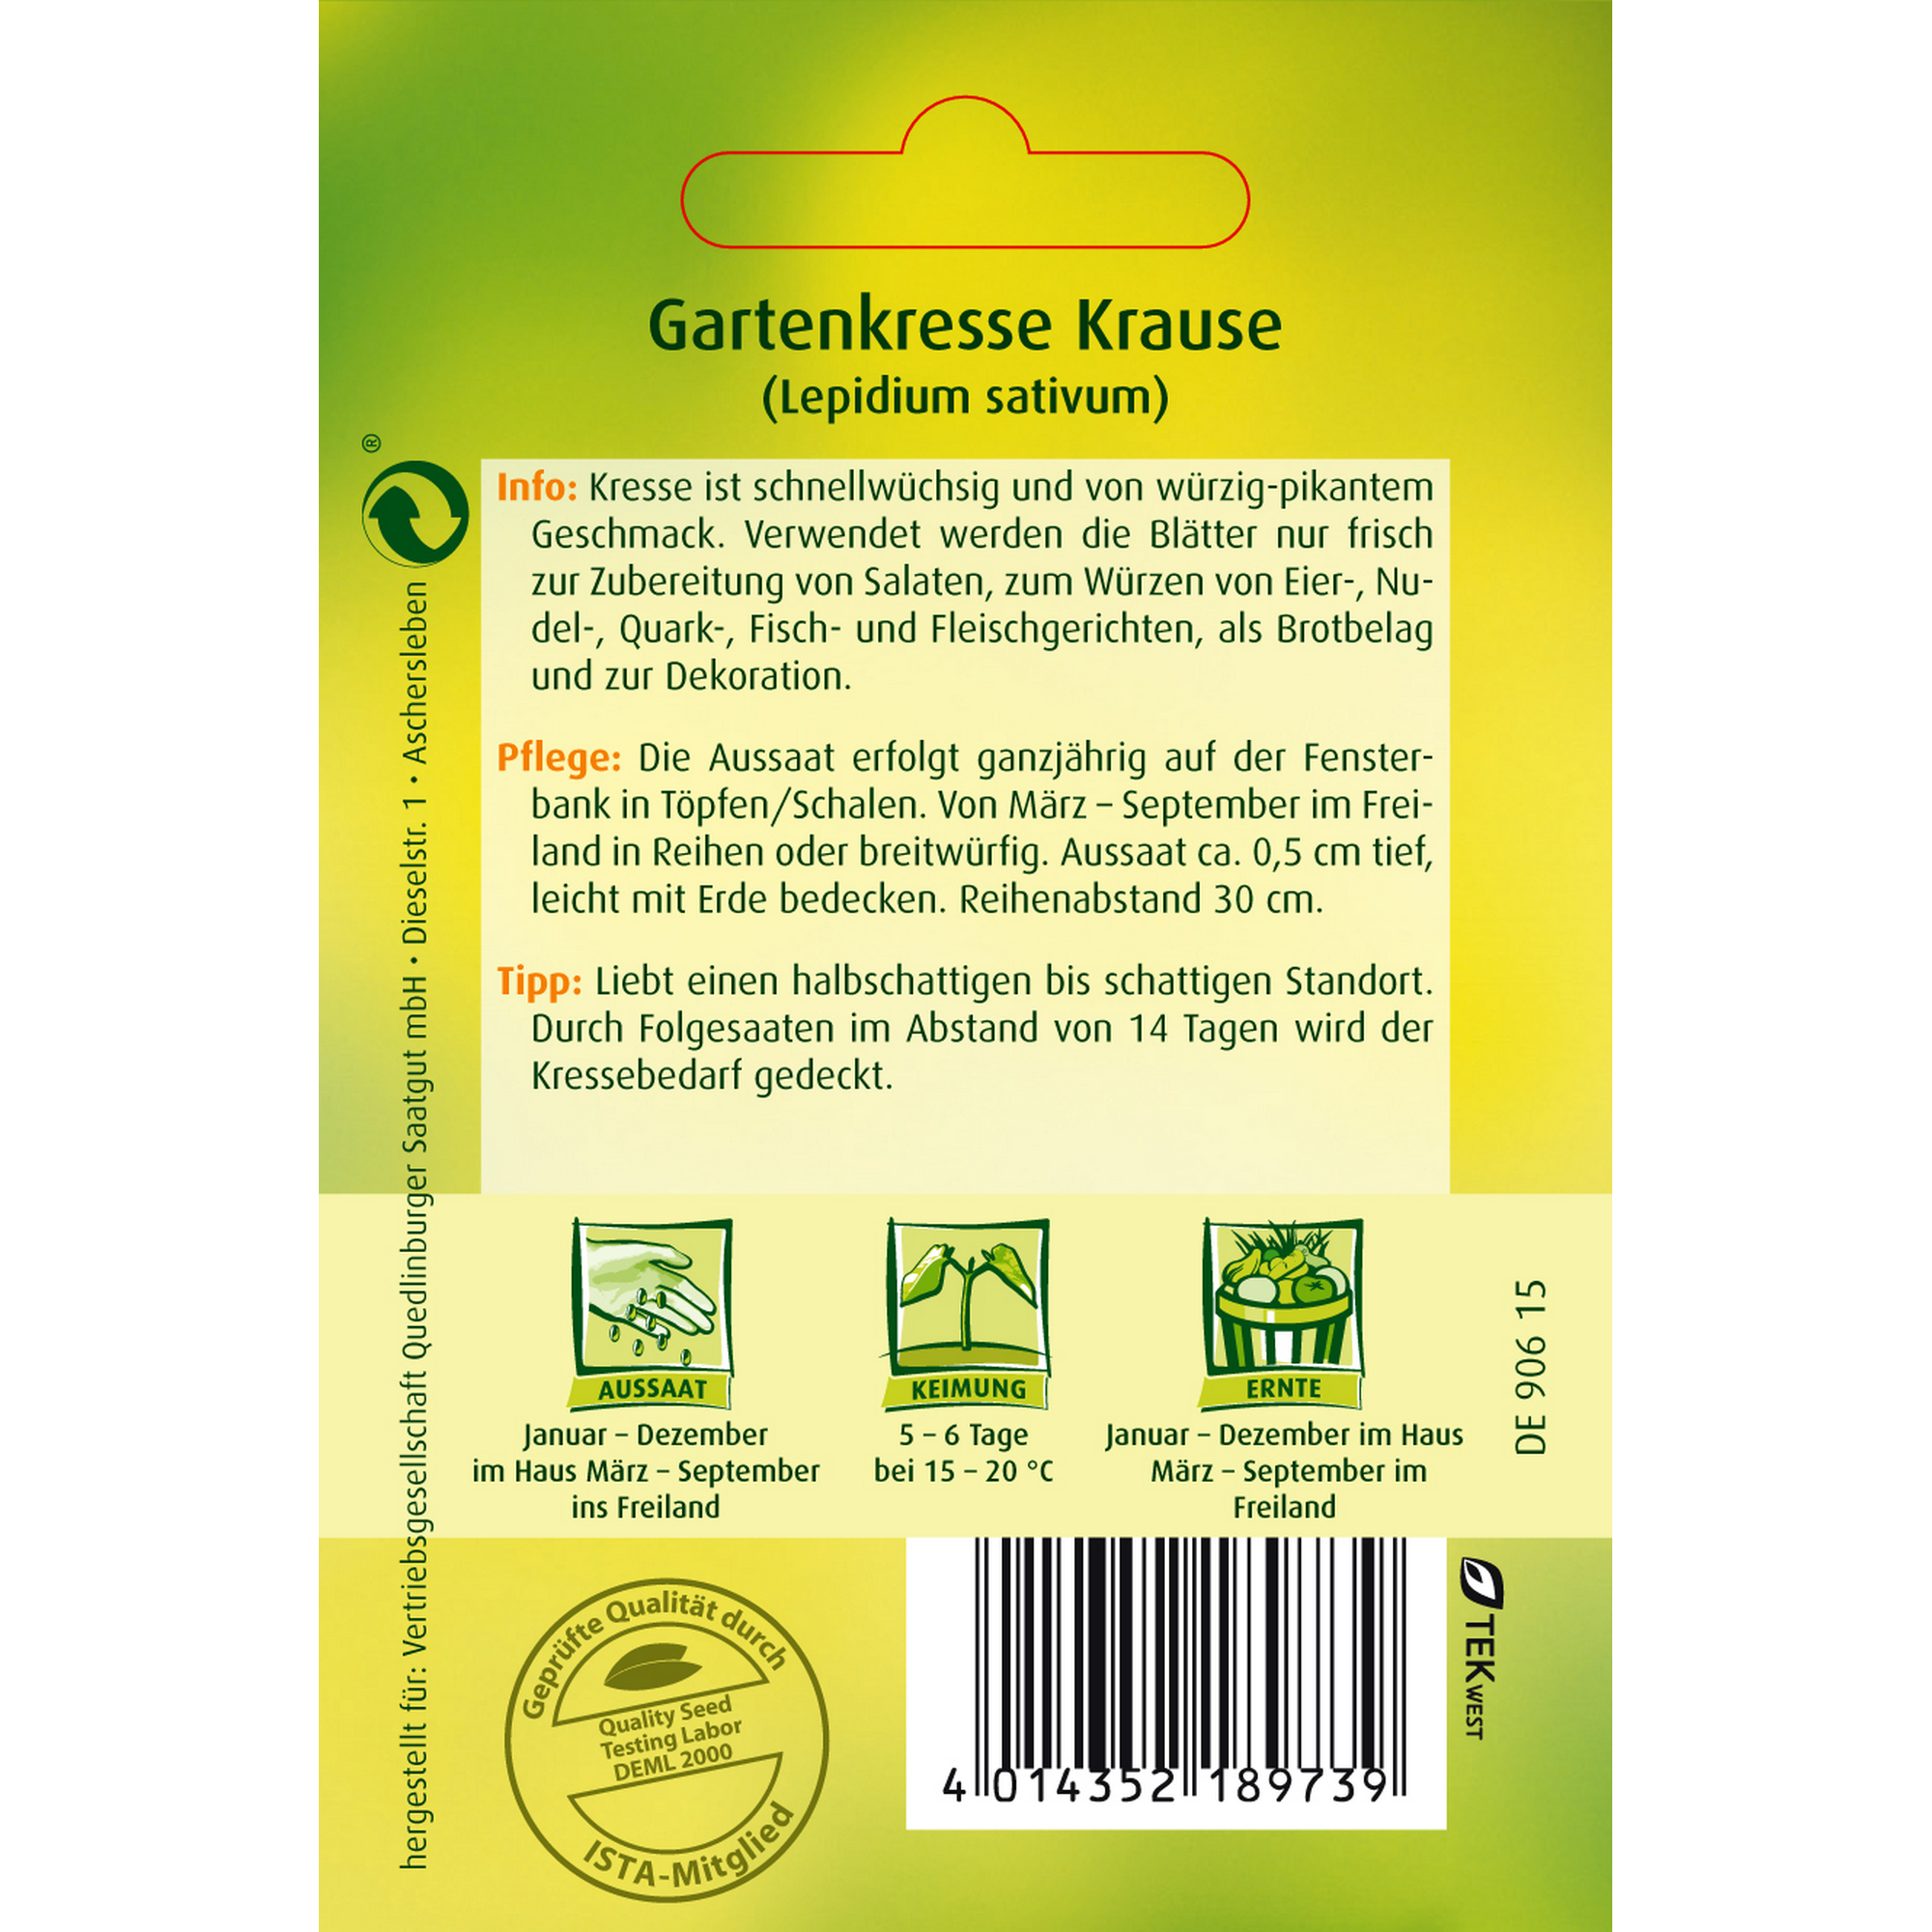 Gartenkresse Krause + product picture